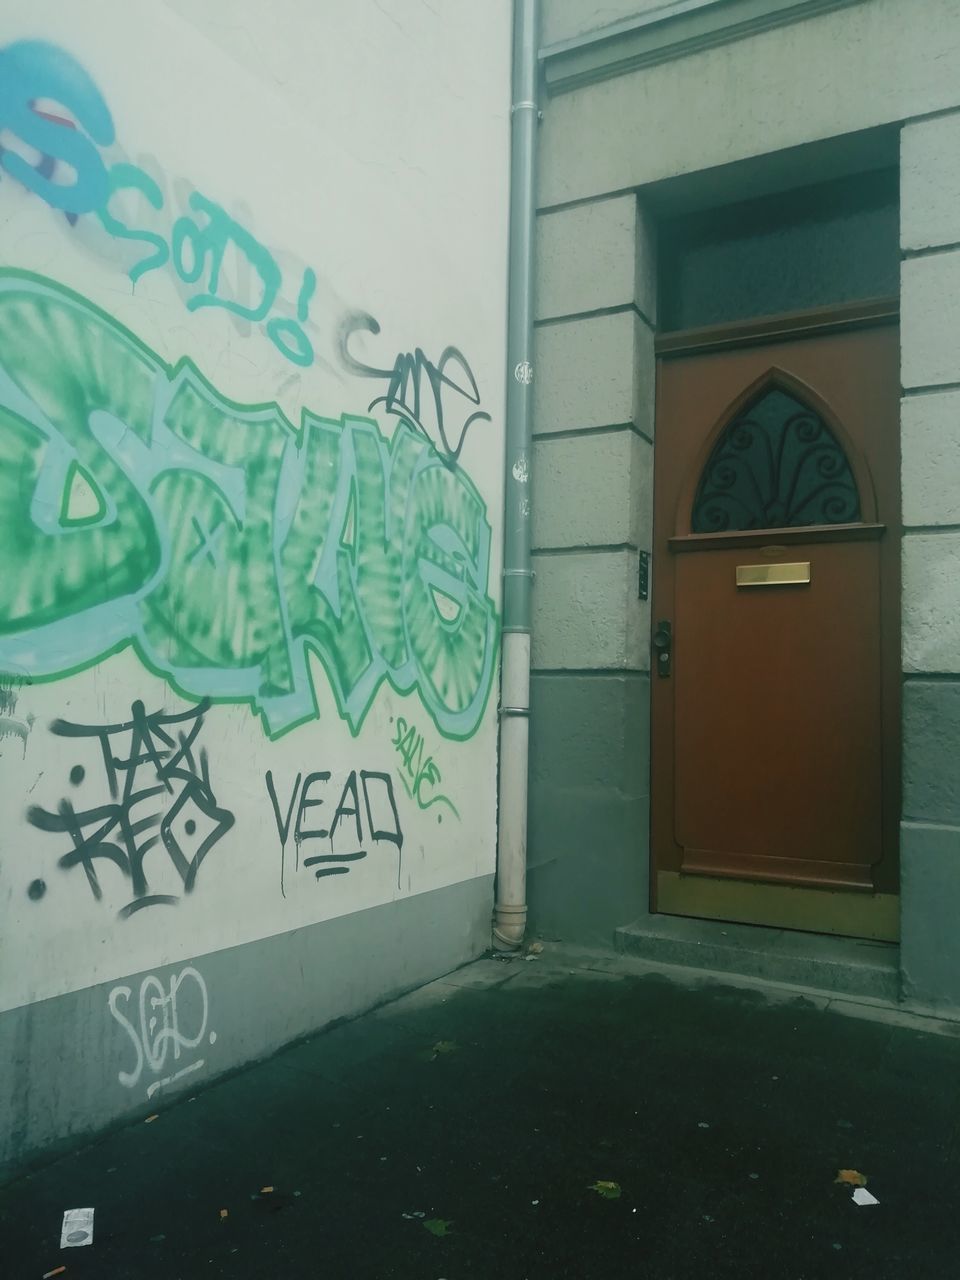 architecture, built structure, graffiti, entrance, door, no people, wall - building feature, text, communication, art and craft, creativity, building exterior, building, day, closed, western script, human representation, representation, wall